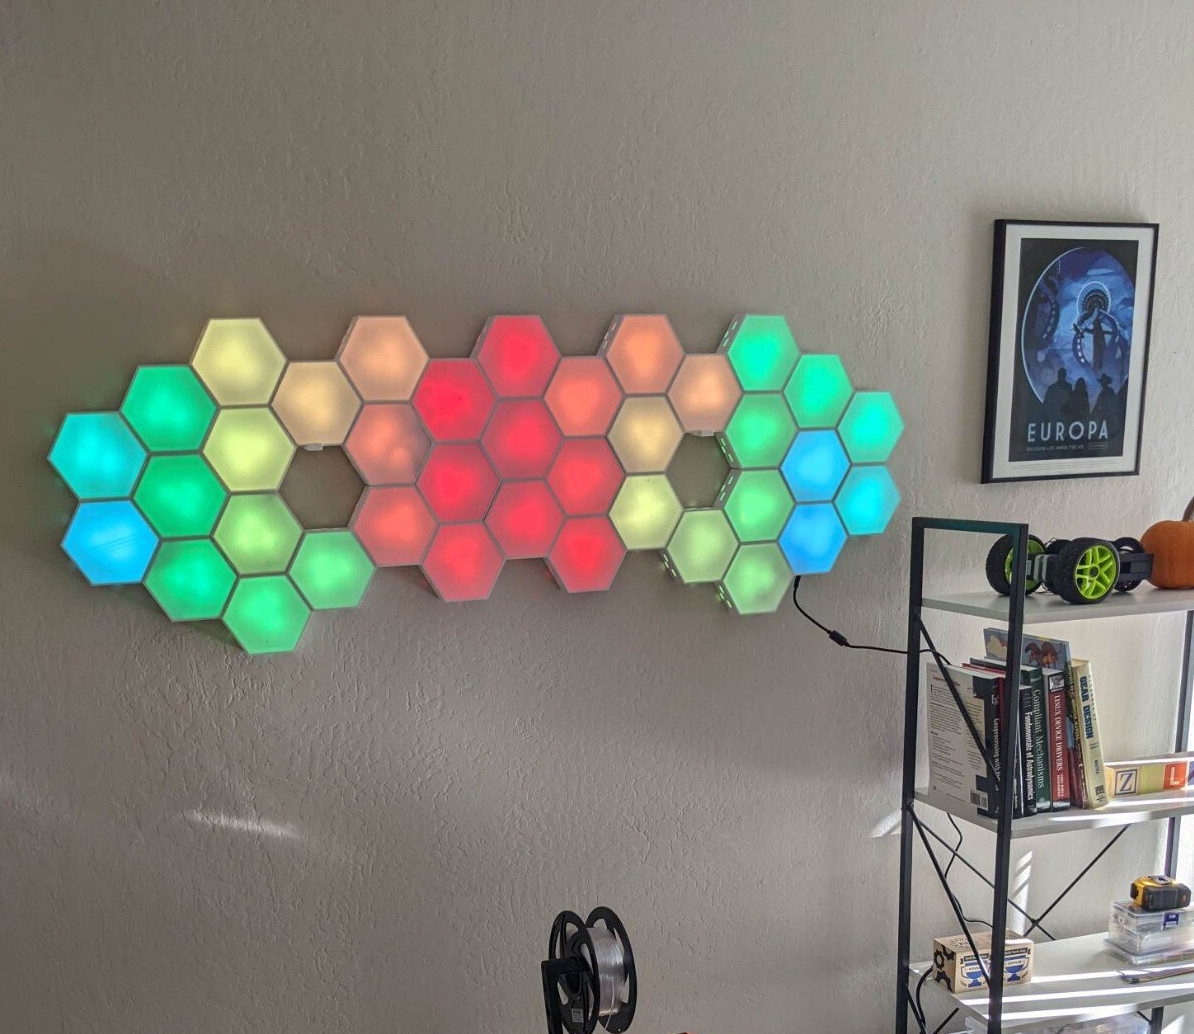 My custom wall art. I designed the physical parts in OpenSCAD, 3-d printed them, designed the pcbs, and finally assembled everything by hand.